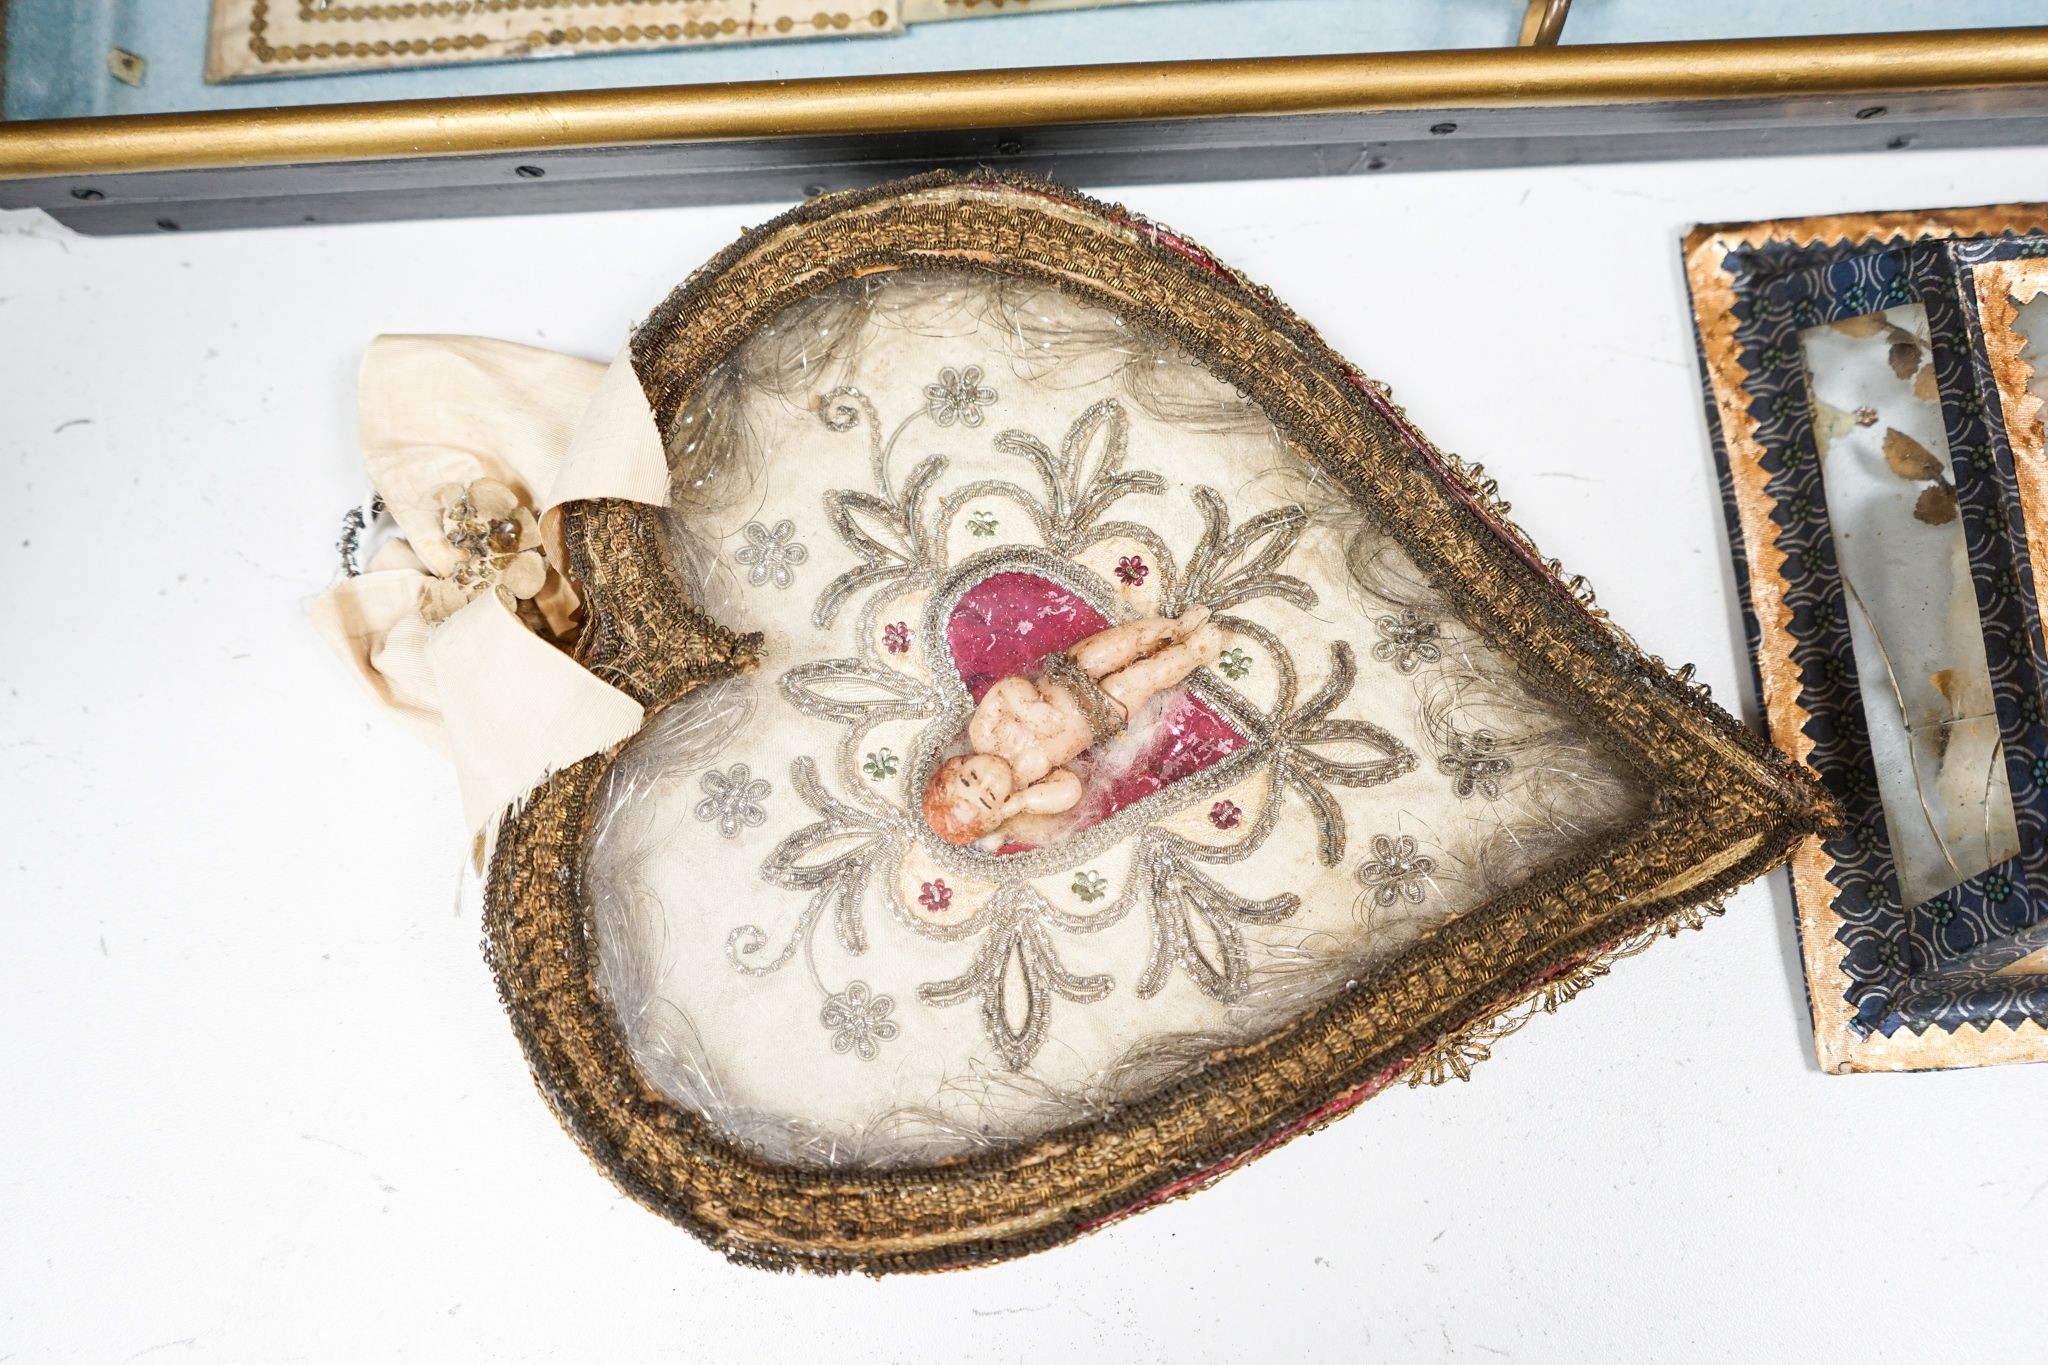 A late 18th / early 19th century Continental figurative framed fan and two religious cased effigy of baby Jesus